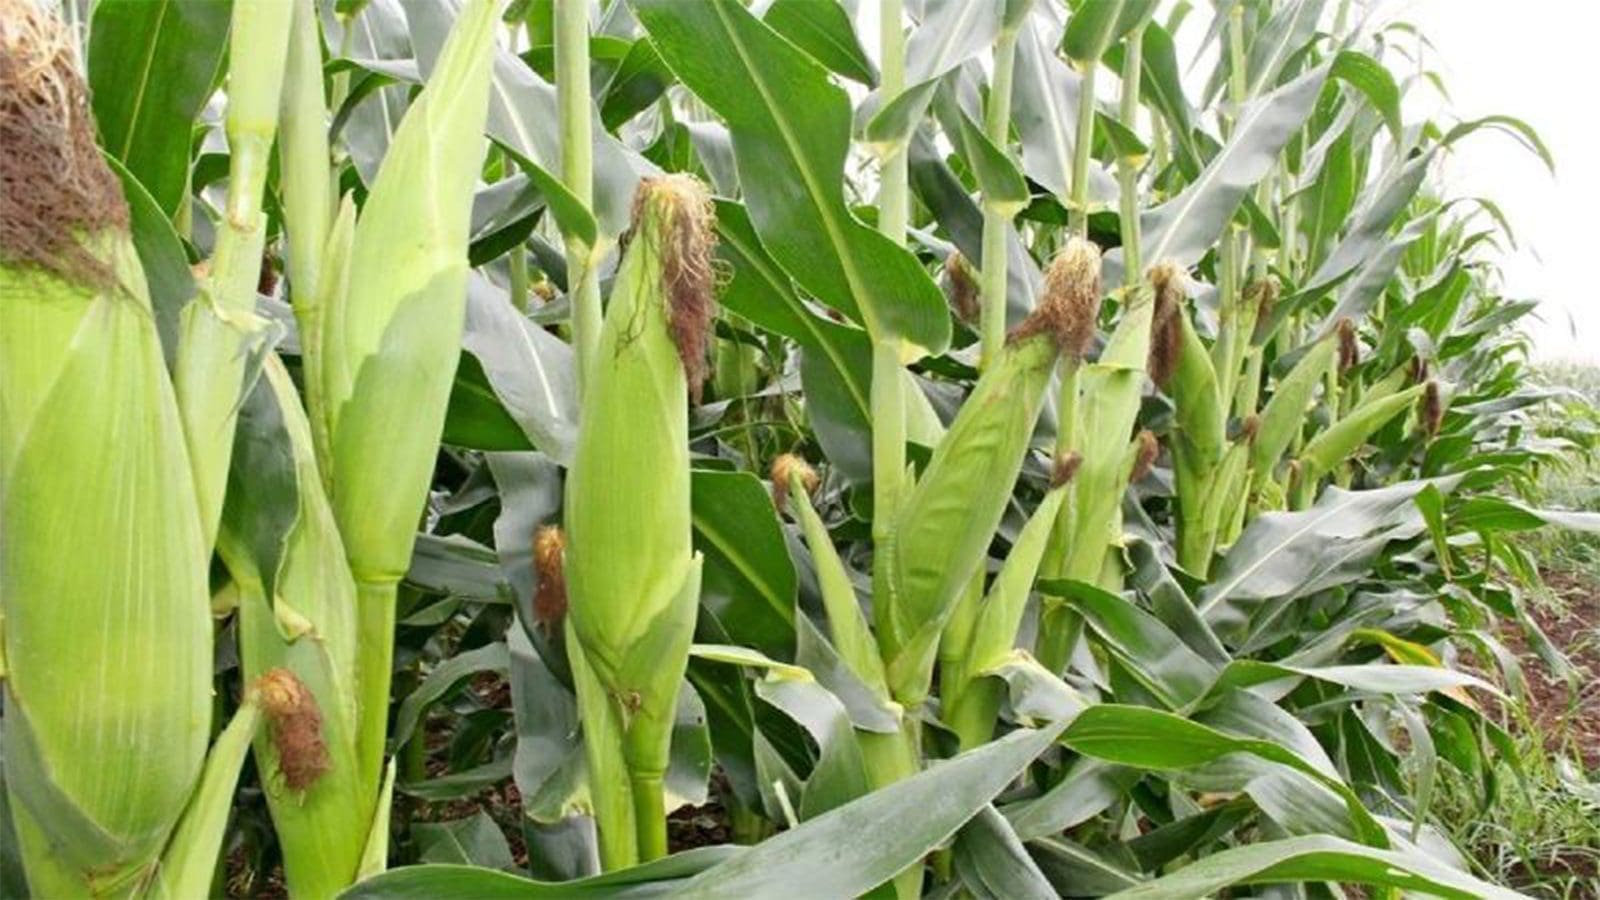 AfDB to support Nigeria with climate-tolerant varieties to boost food security